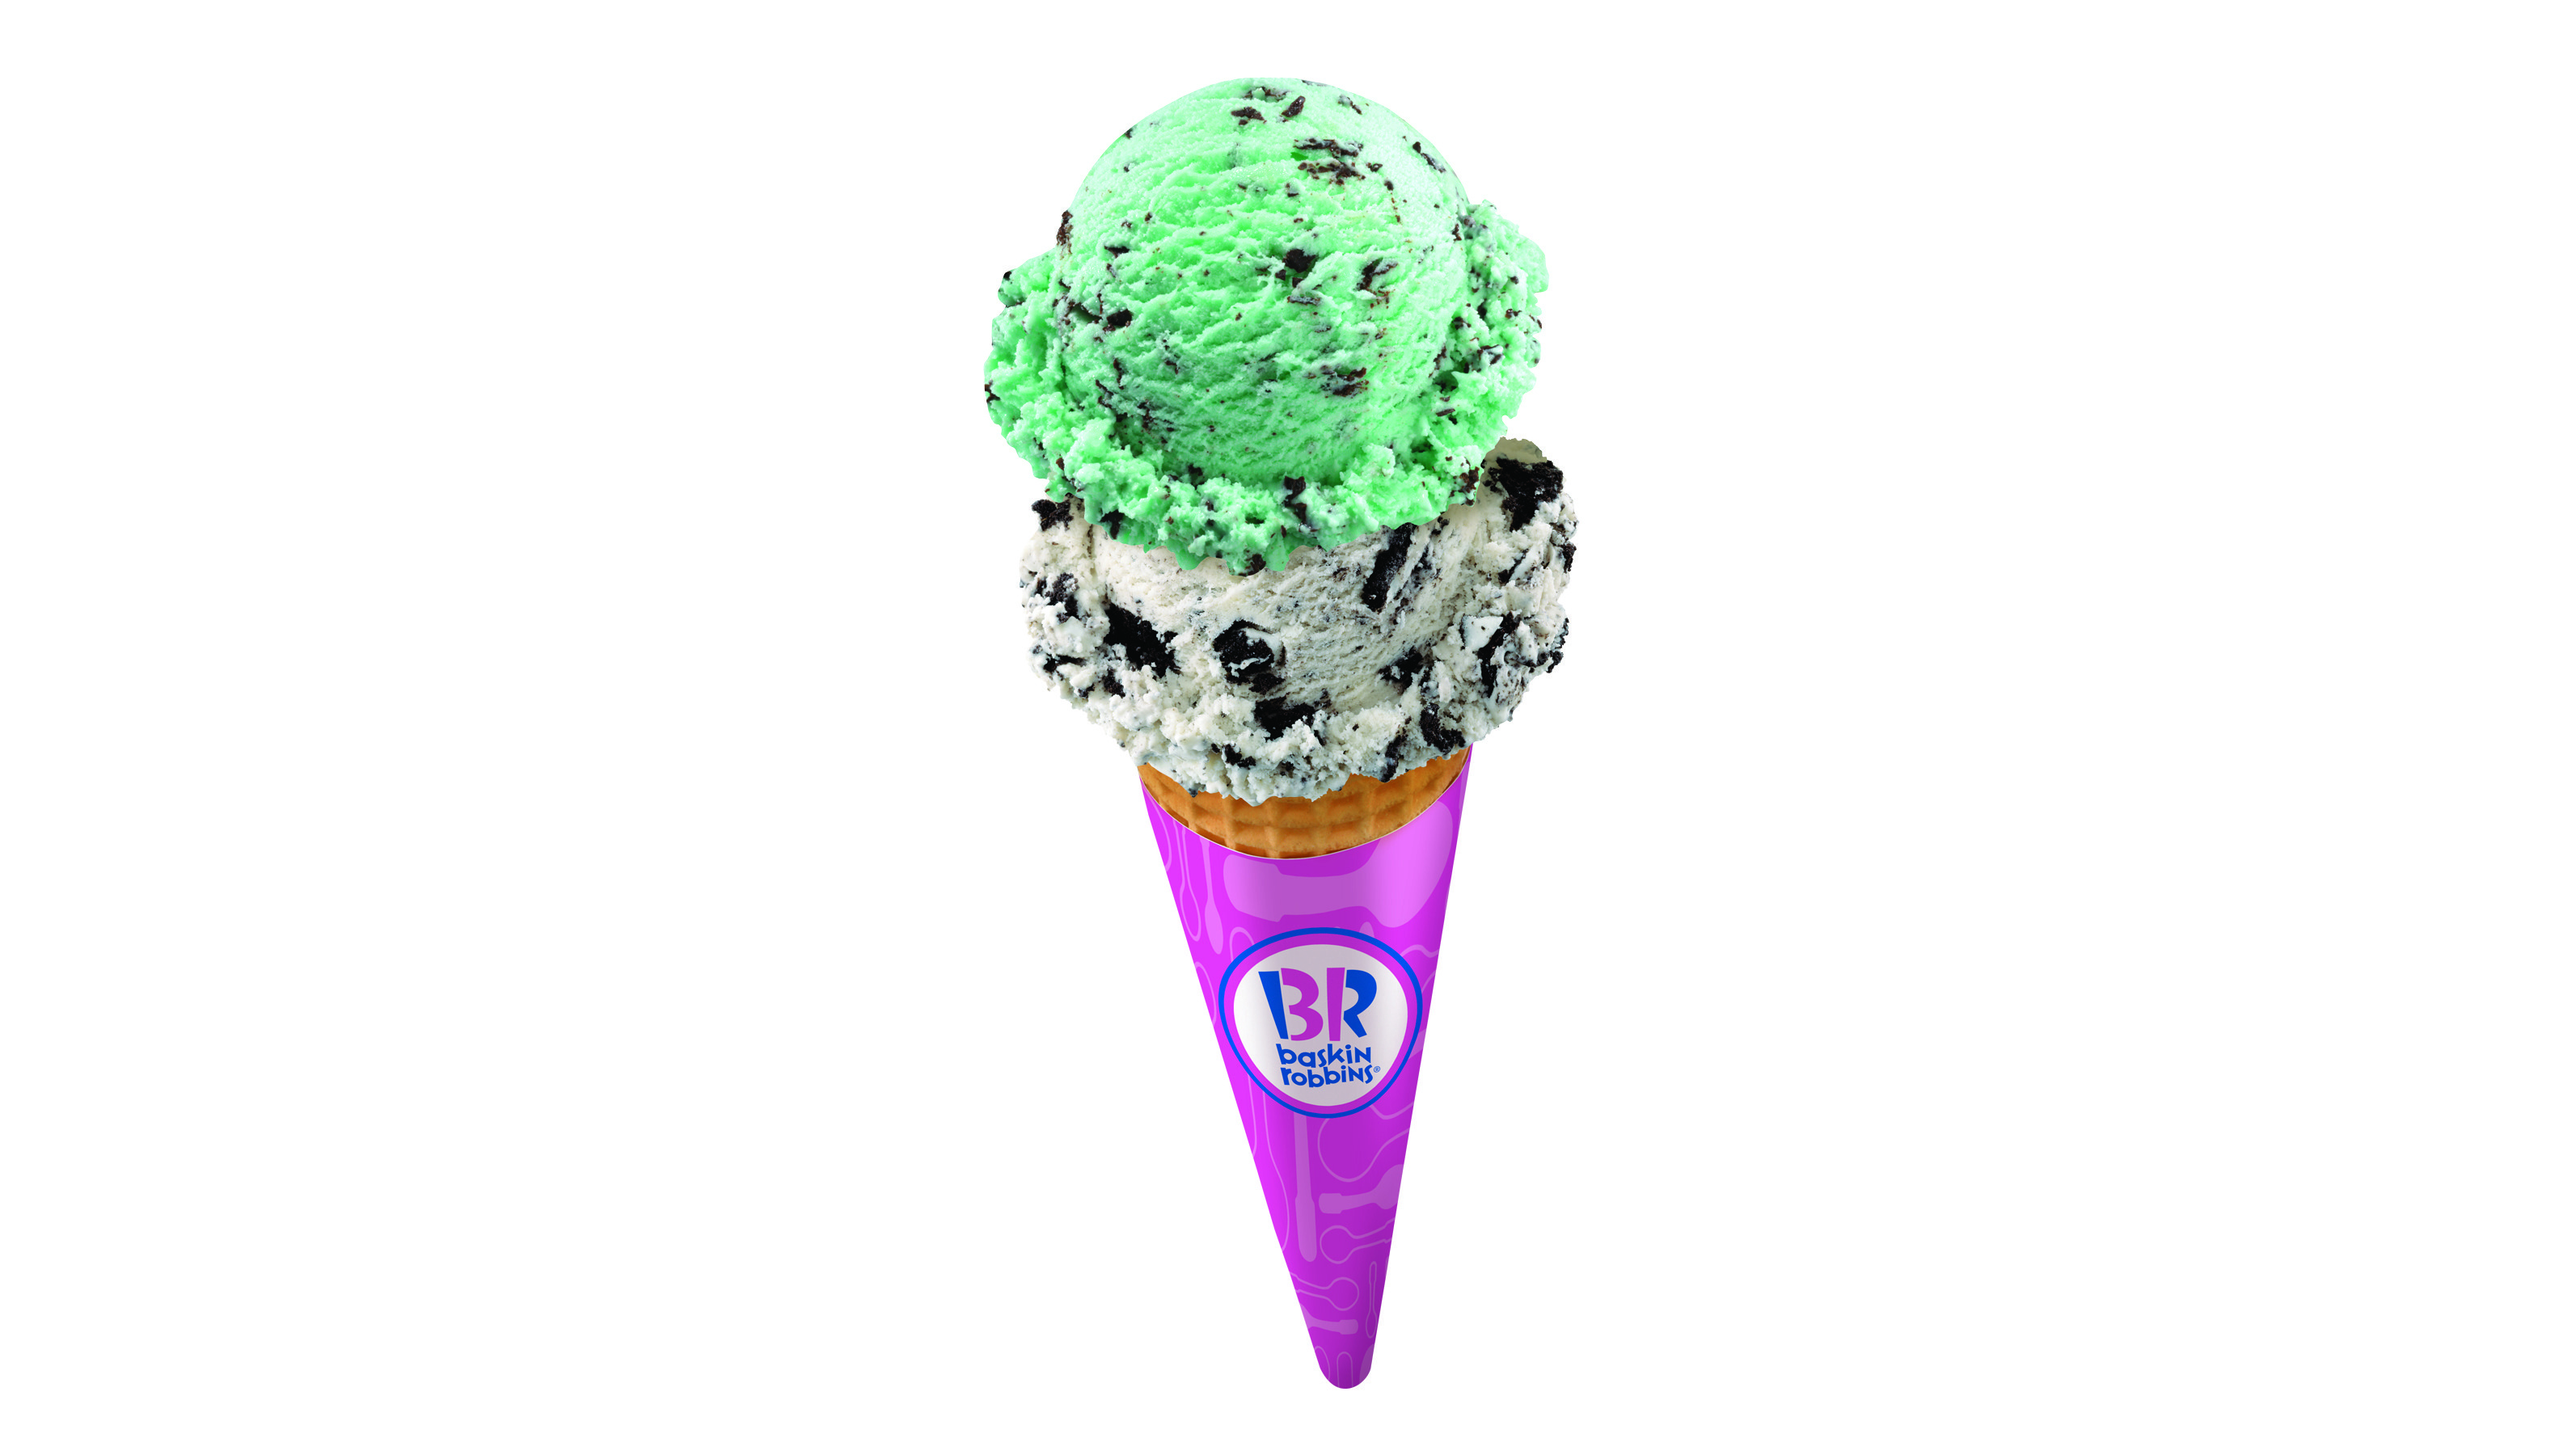 Baskin Robbins: The Waffle Cone, 31 flavors, More than 1,300 flavors since 1945. 3190x1800 HD Wallpaper.